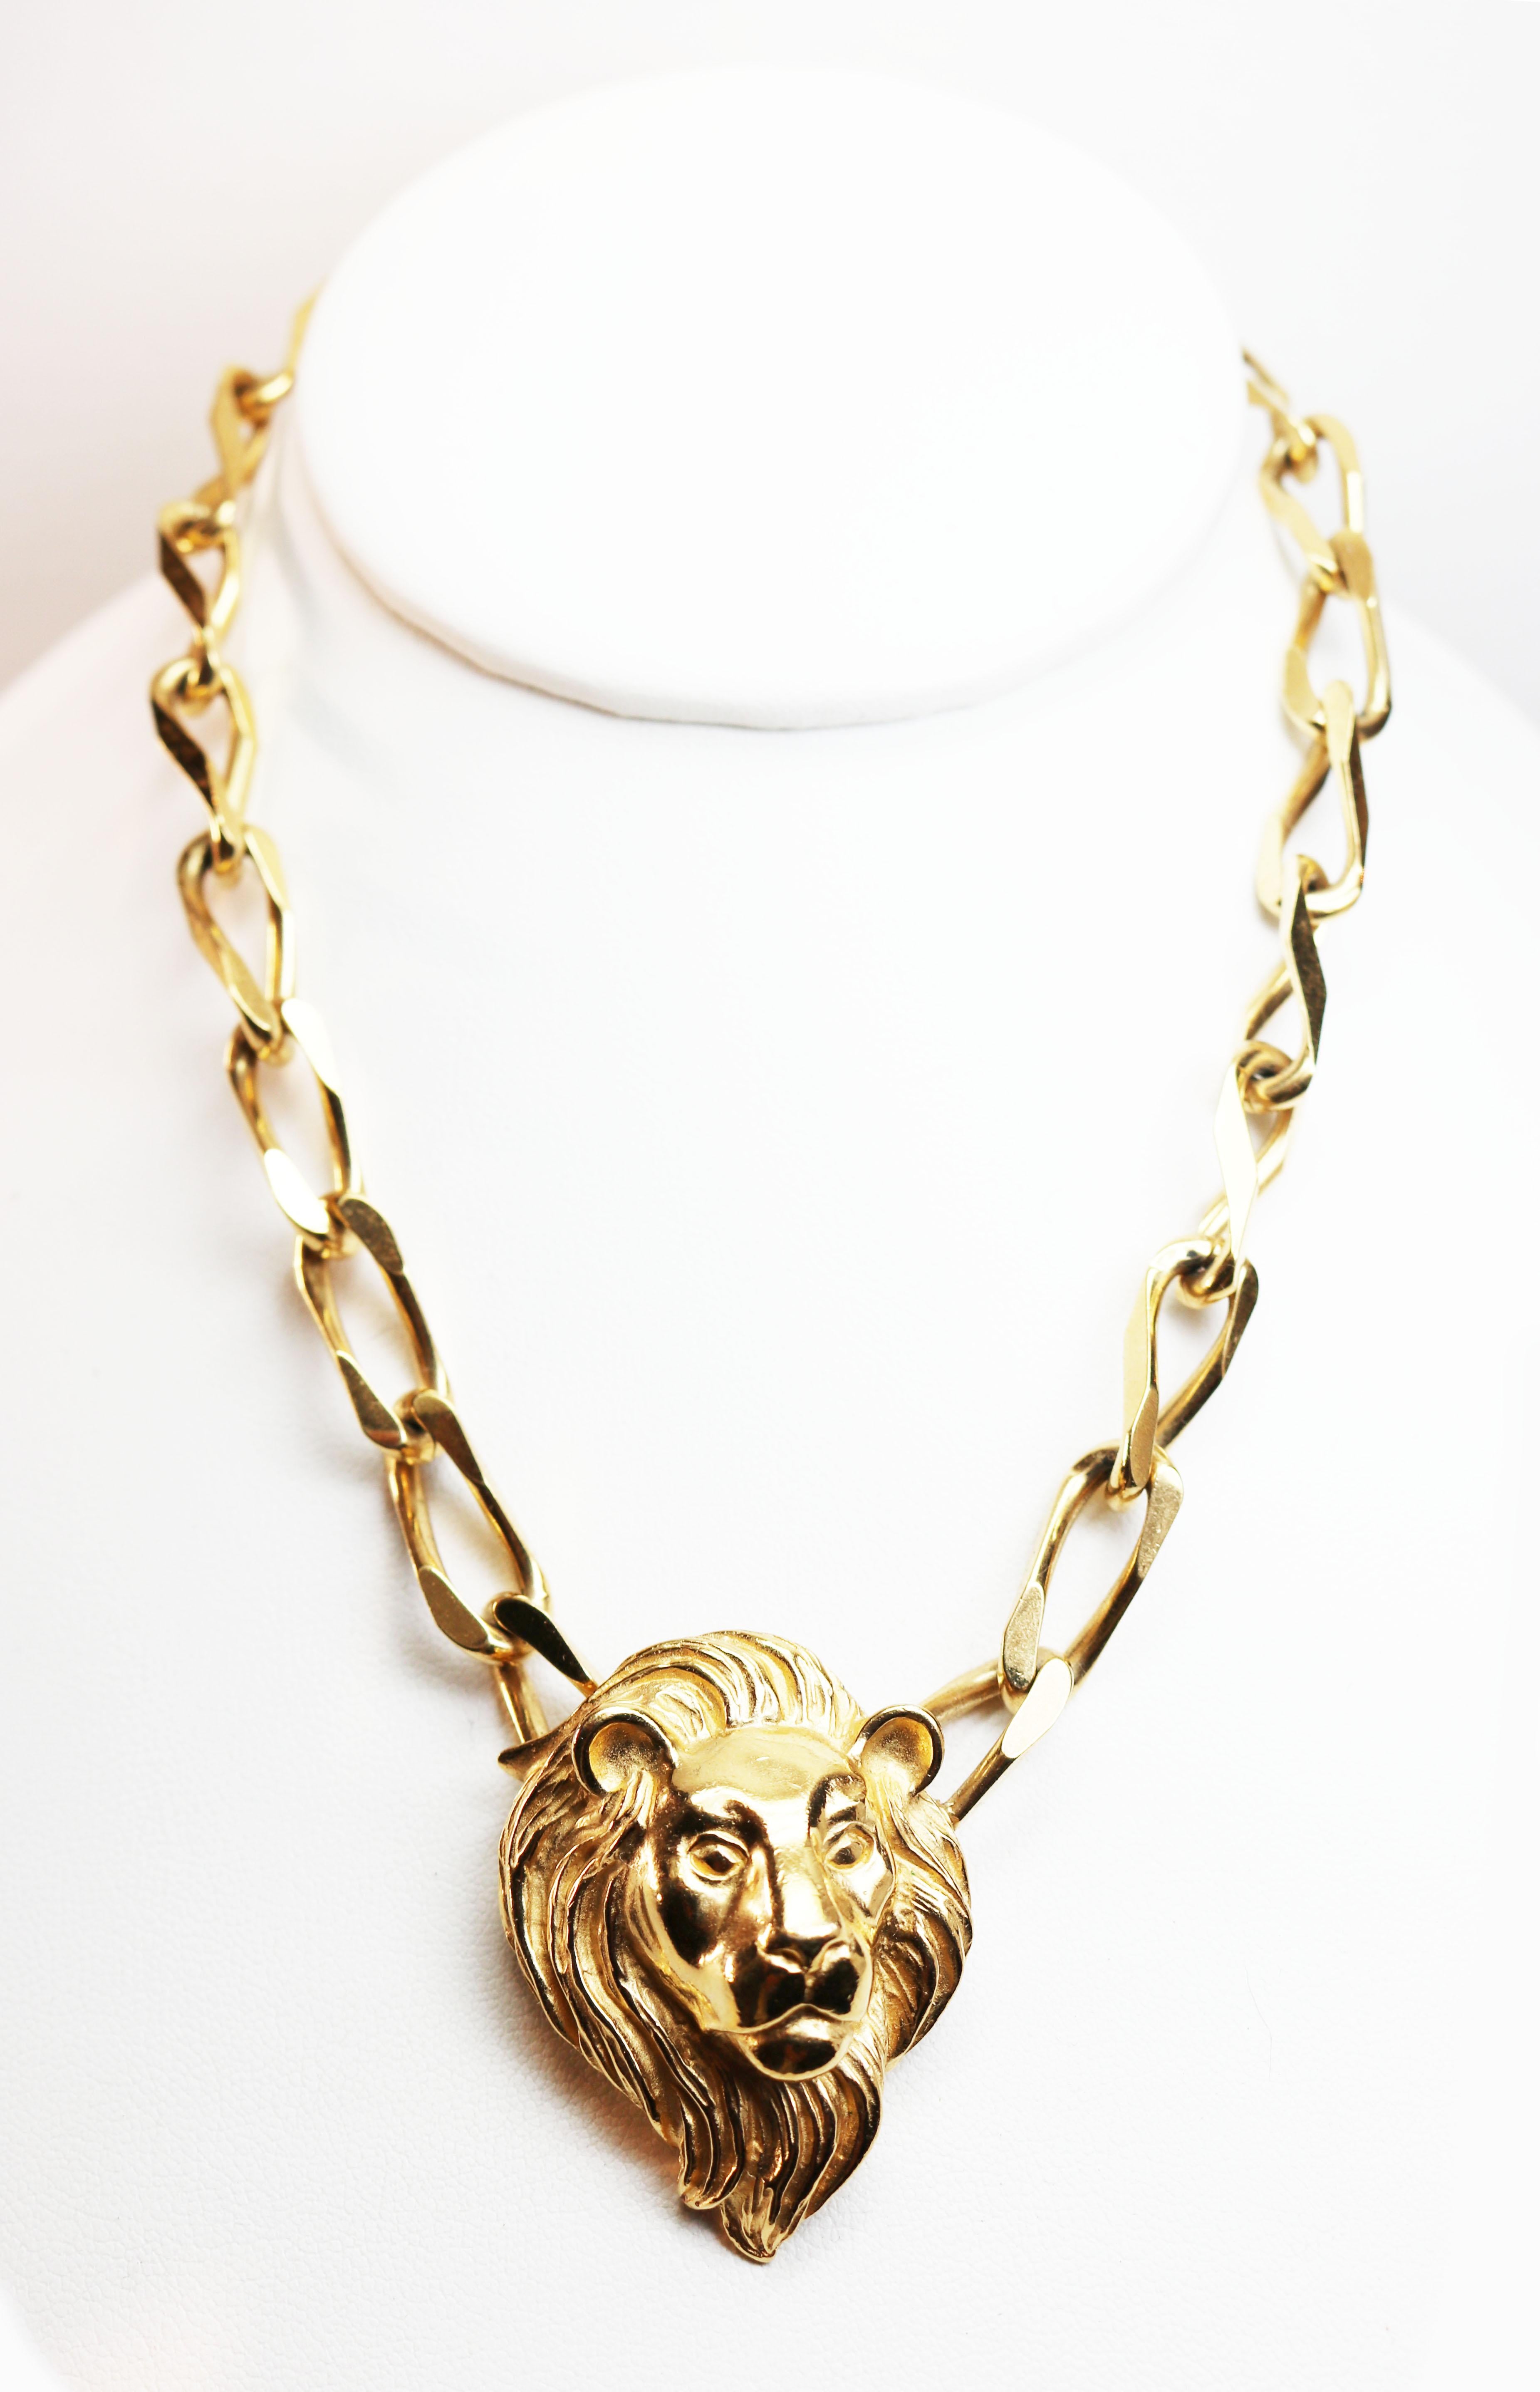 Napier lion's head choker length necklace is gold plated and has a very unique clasp which is on the charm itself. 
Trifari designed this imperial piece of jewelry which is choker length and quite stunning. This gold plated pendant necklace is